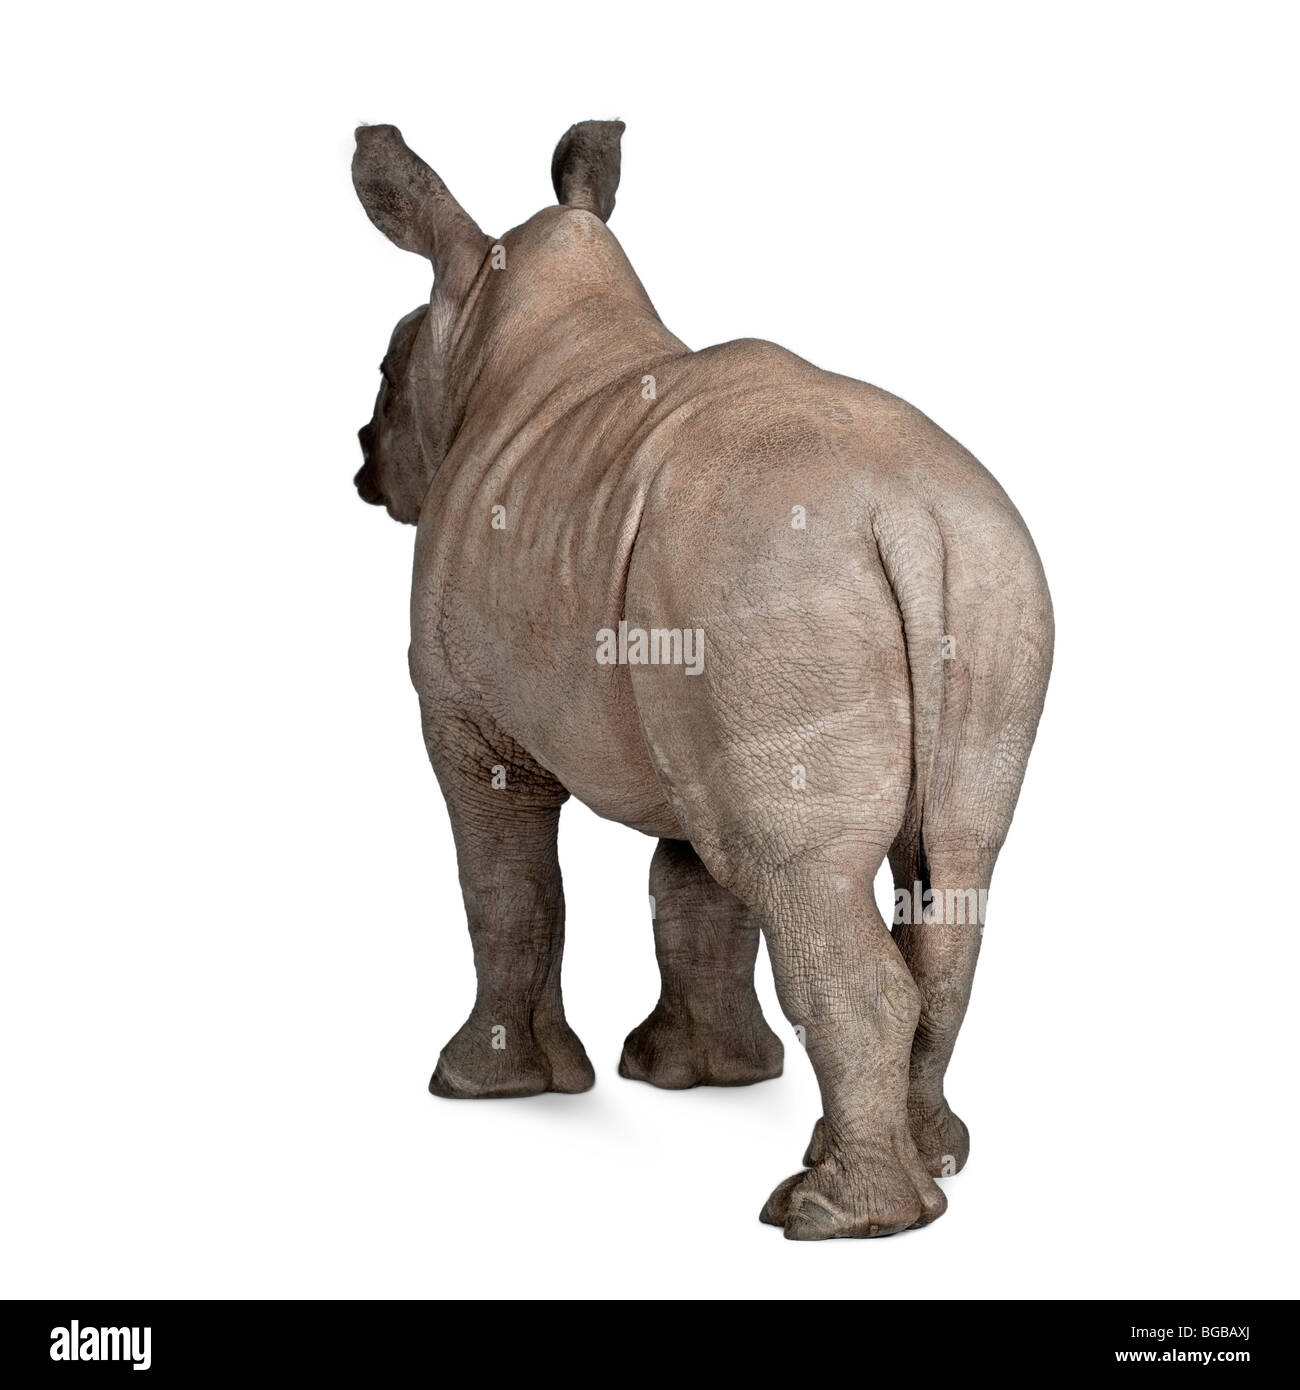 Young White Rhinoceros or Square-lipped rhinoceros, Ceratotherium simum, 2 months old, in front of a white background Stock Photo